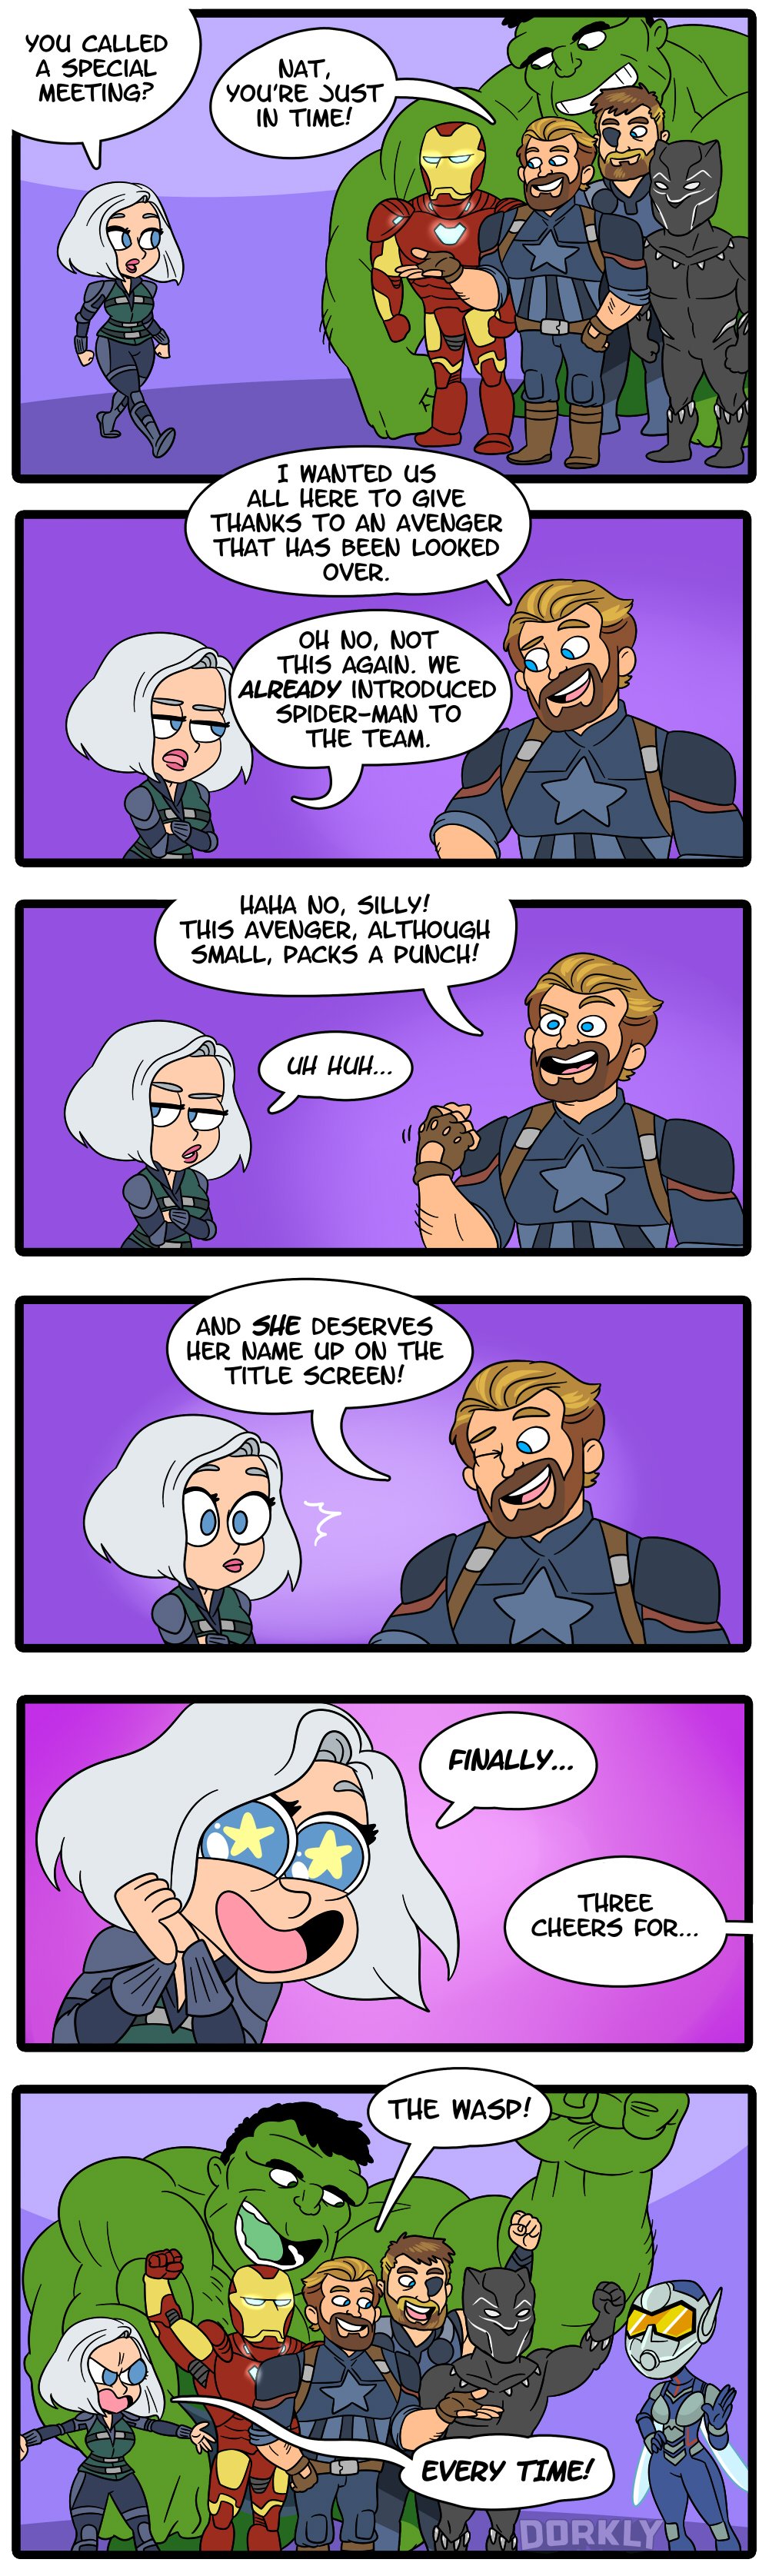 An Avenger Finally Gets The Recognition They Deserve